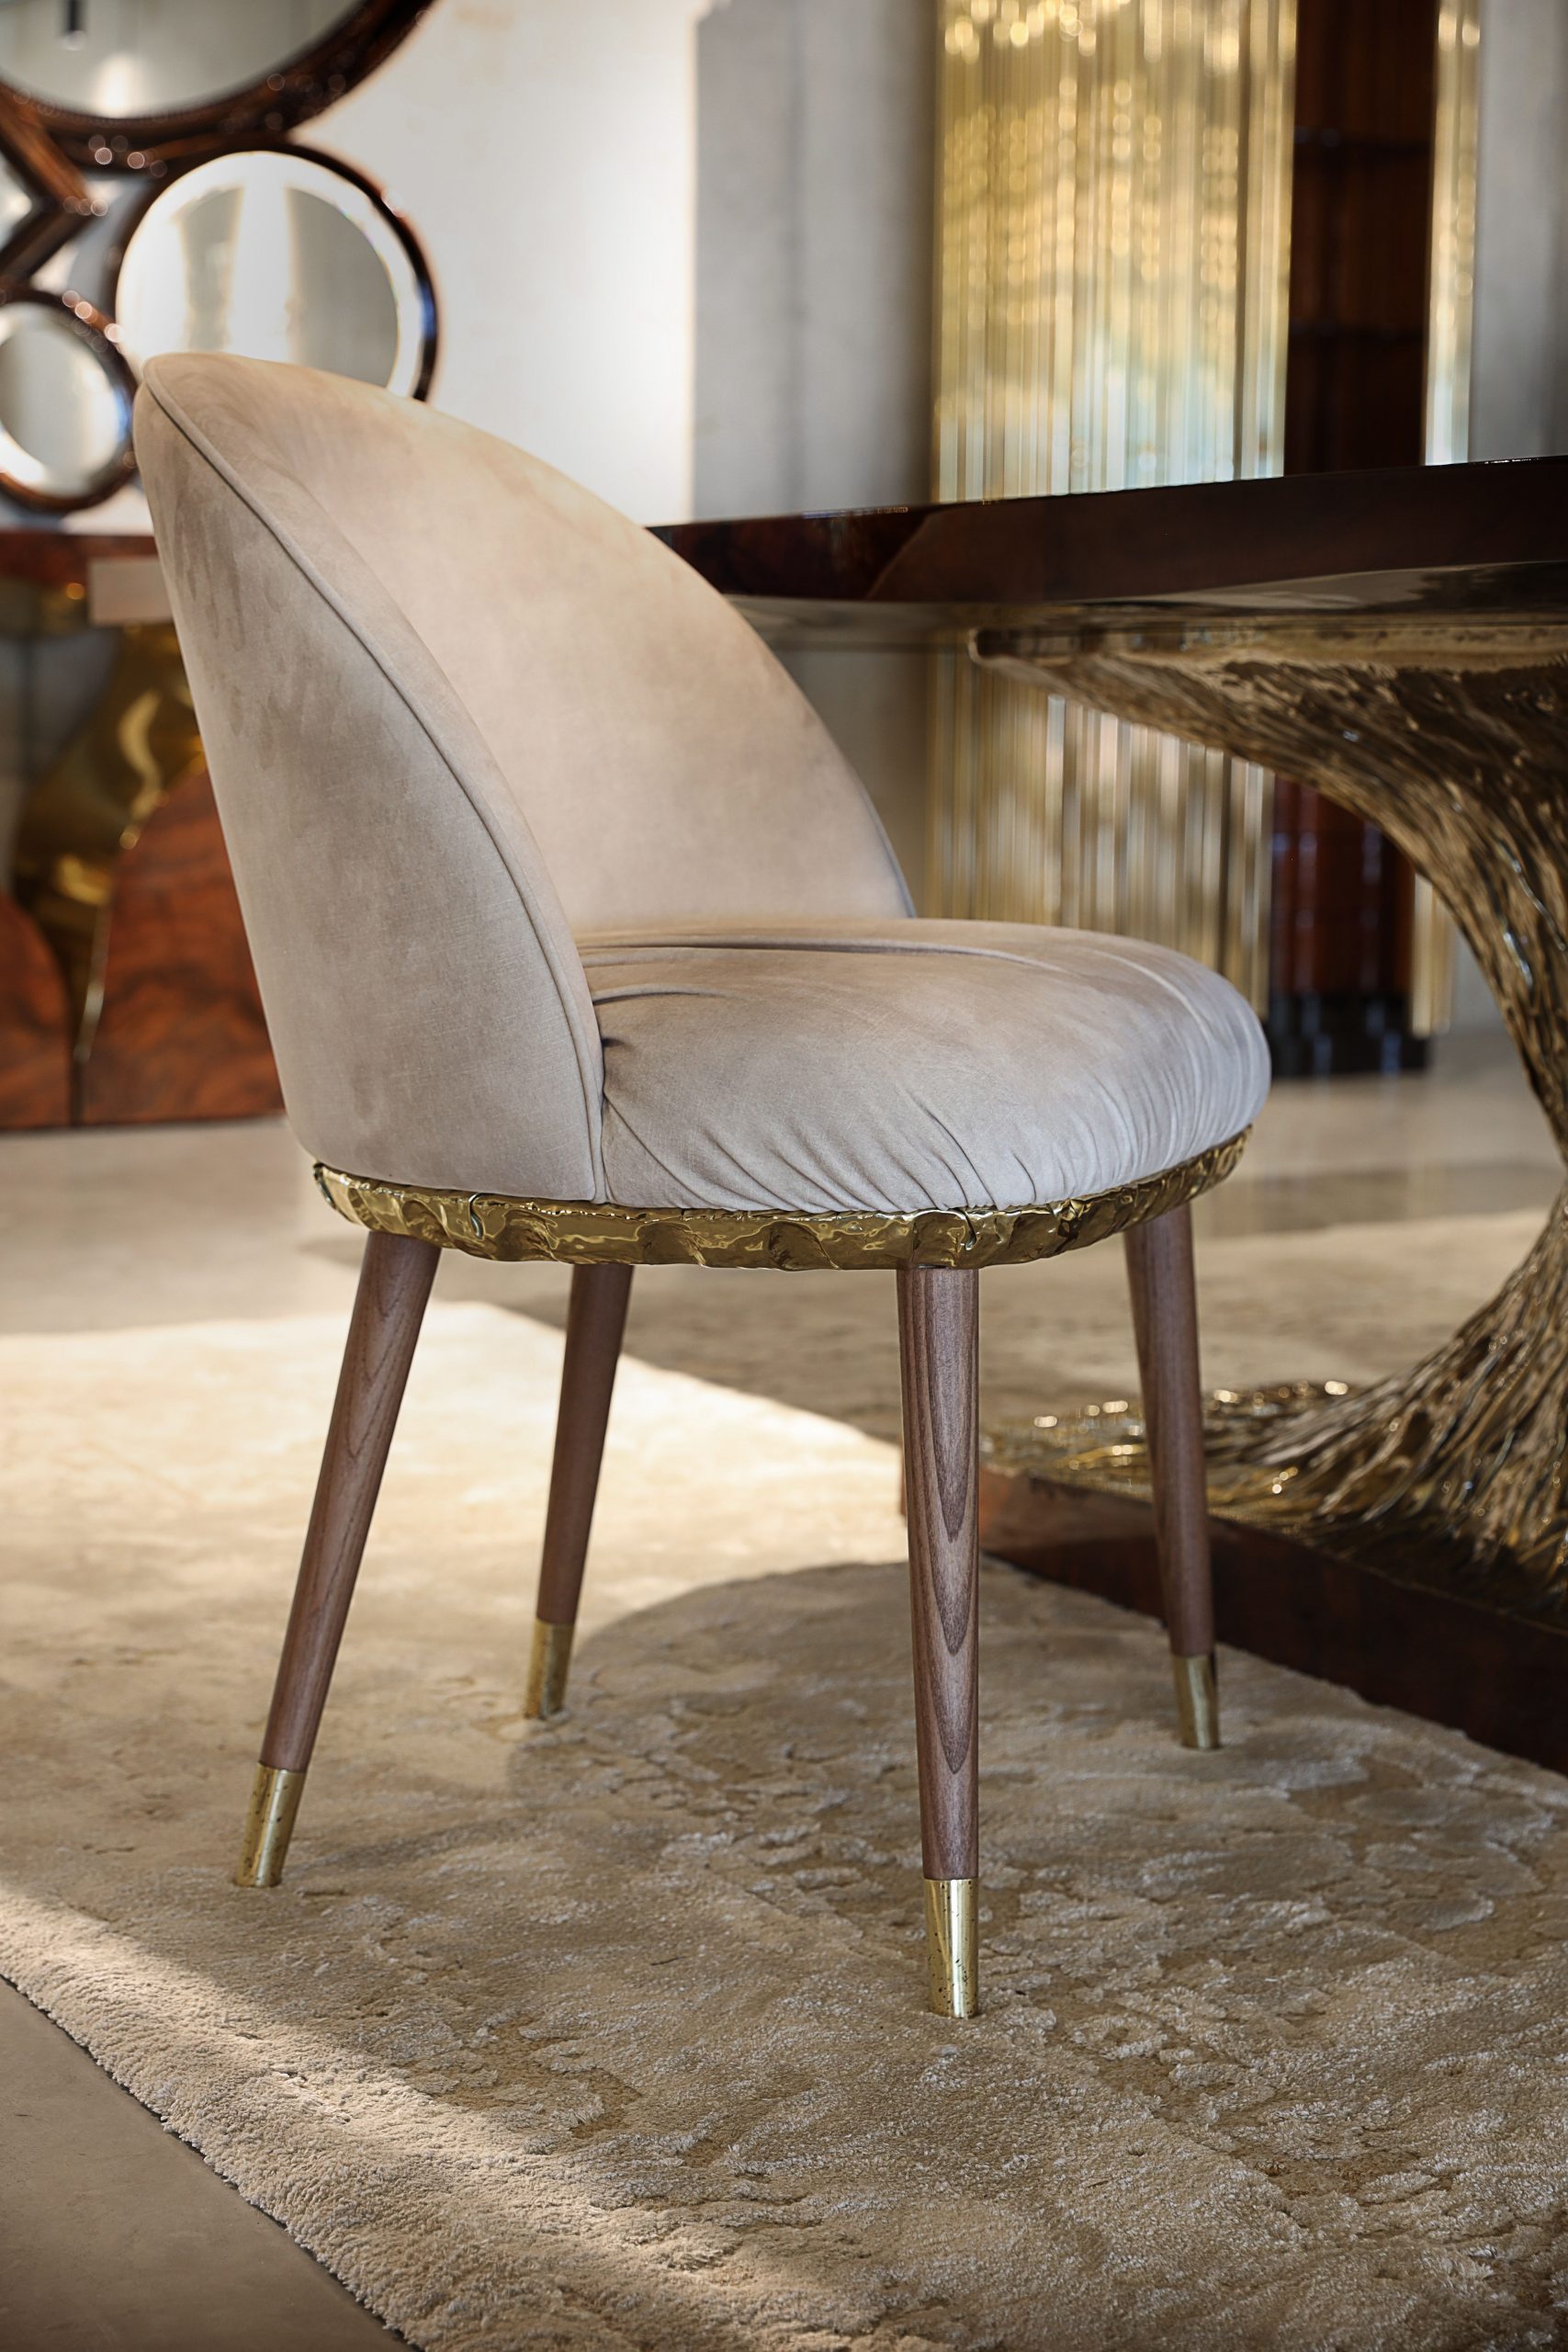 50 Luxury Chairs: Sit In Comfort And Style